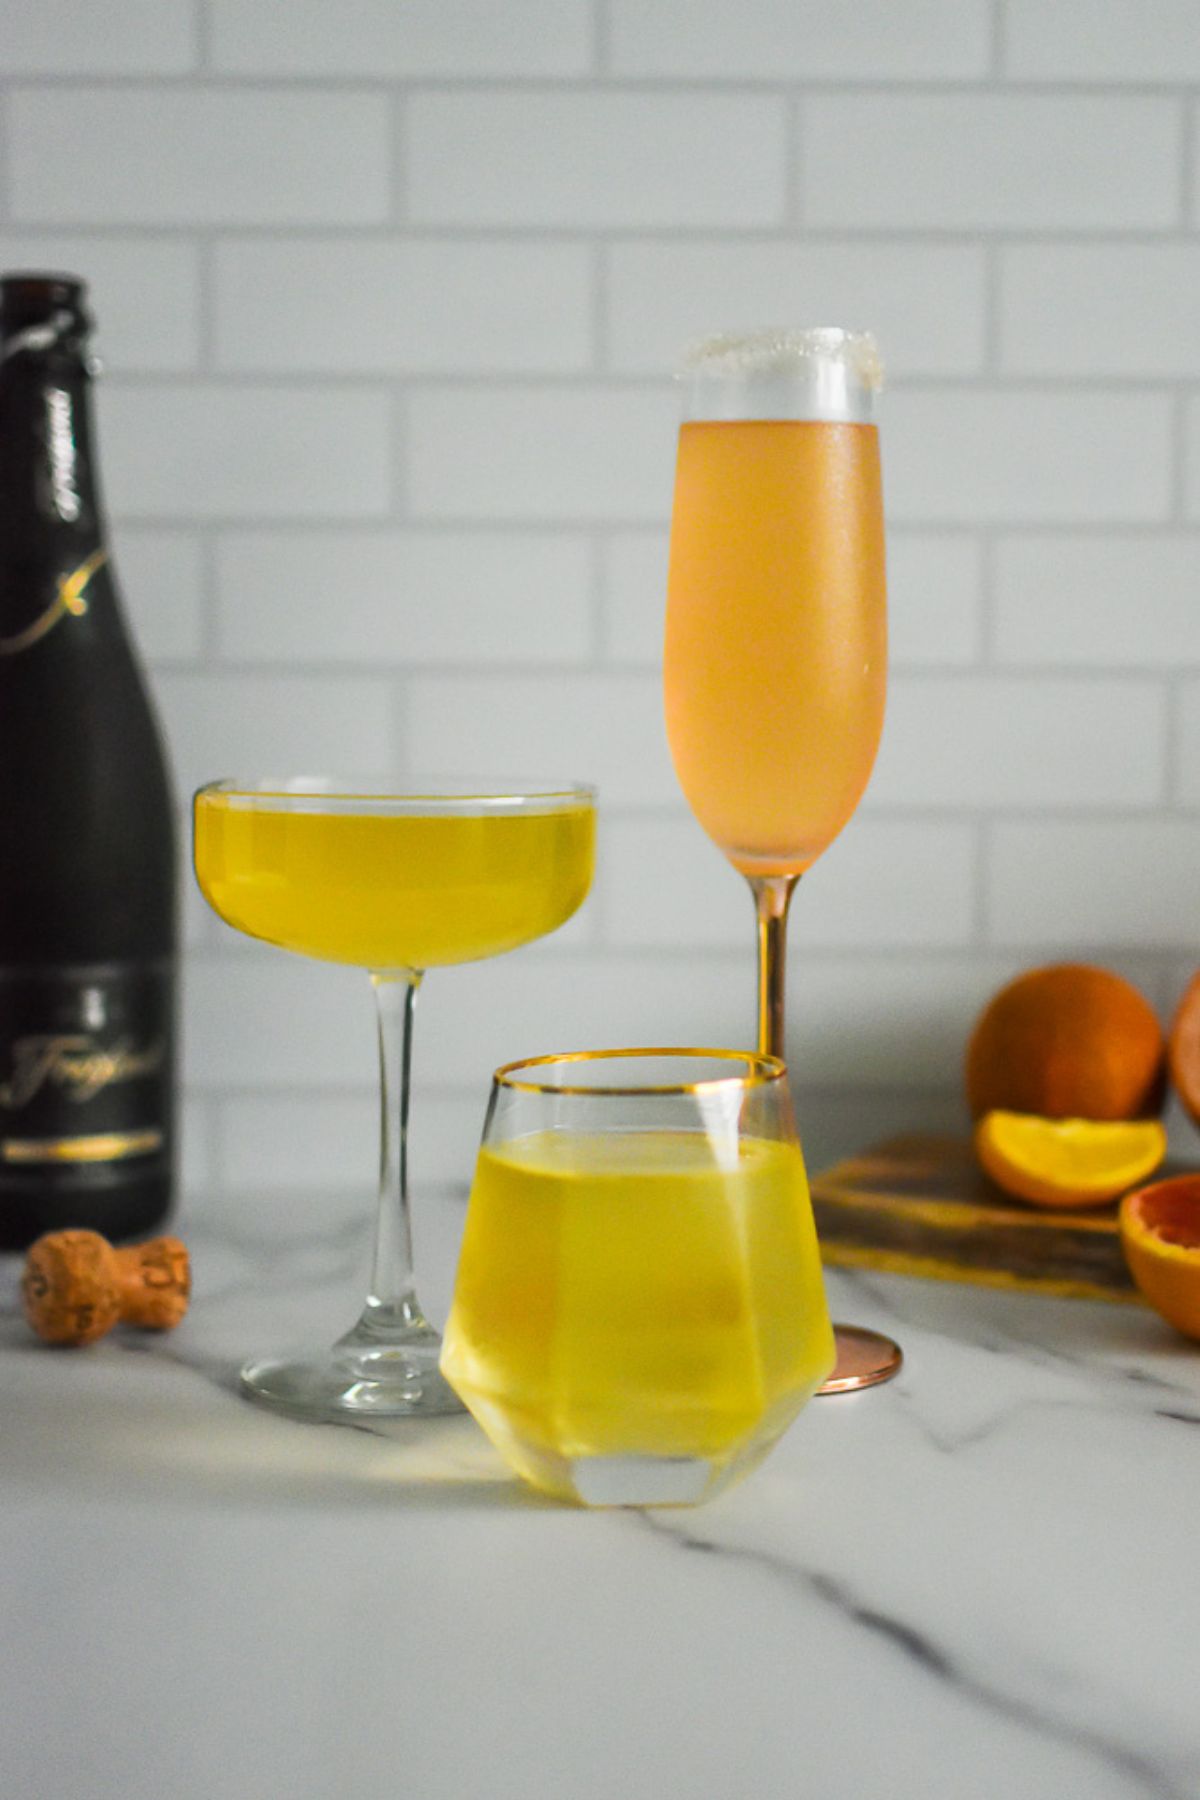 easy citrus champagne cocktails made with different flavored citrus syrups and sparkling wine in festive glasses for celebrating New Year's Eve.